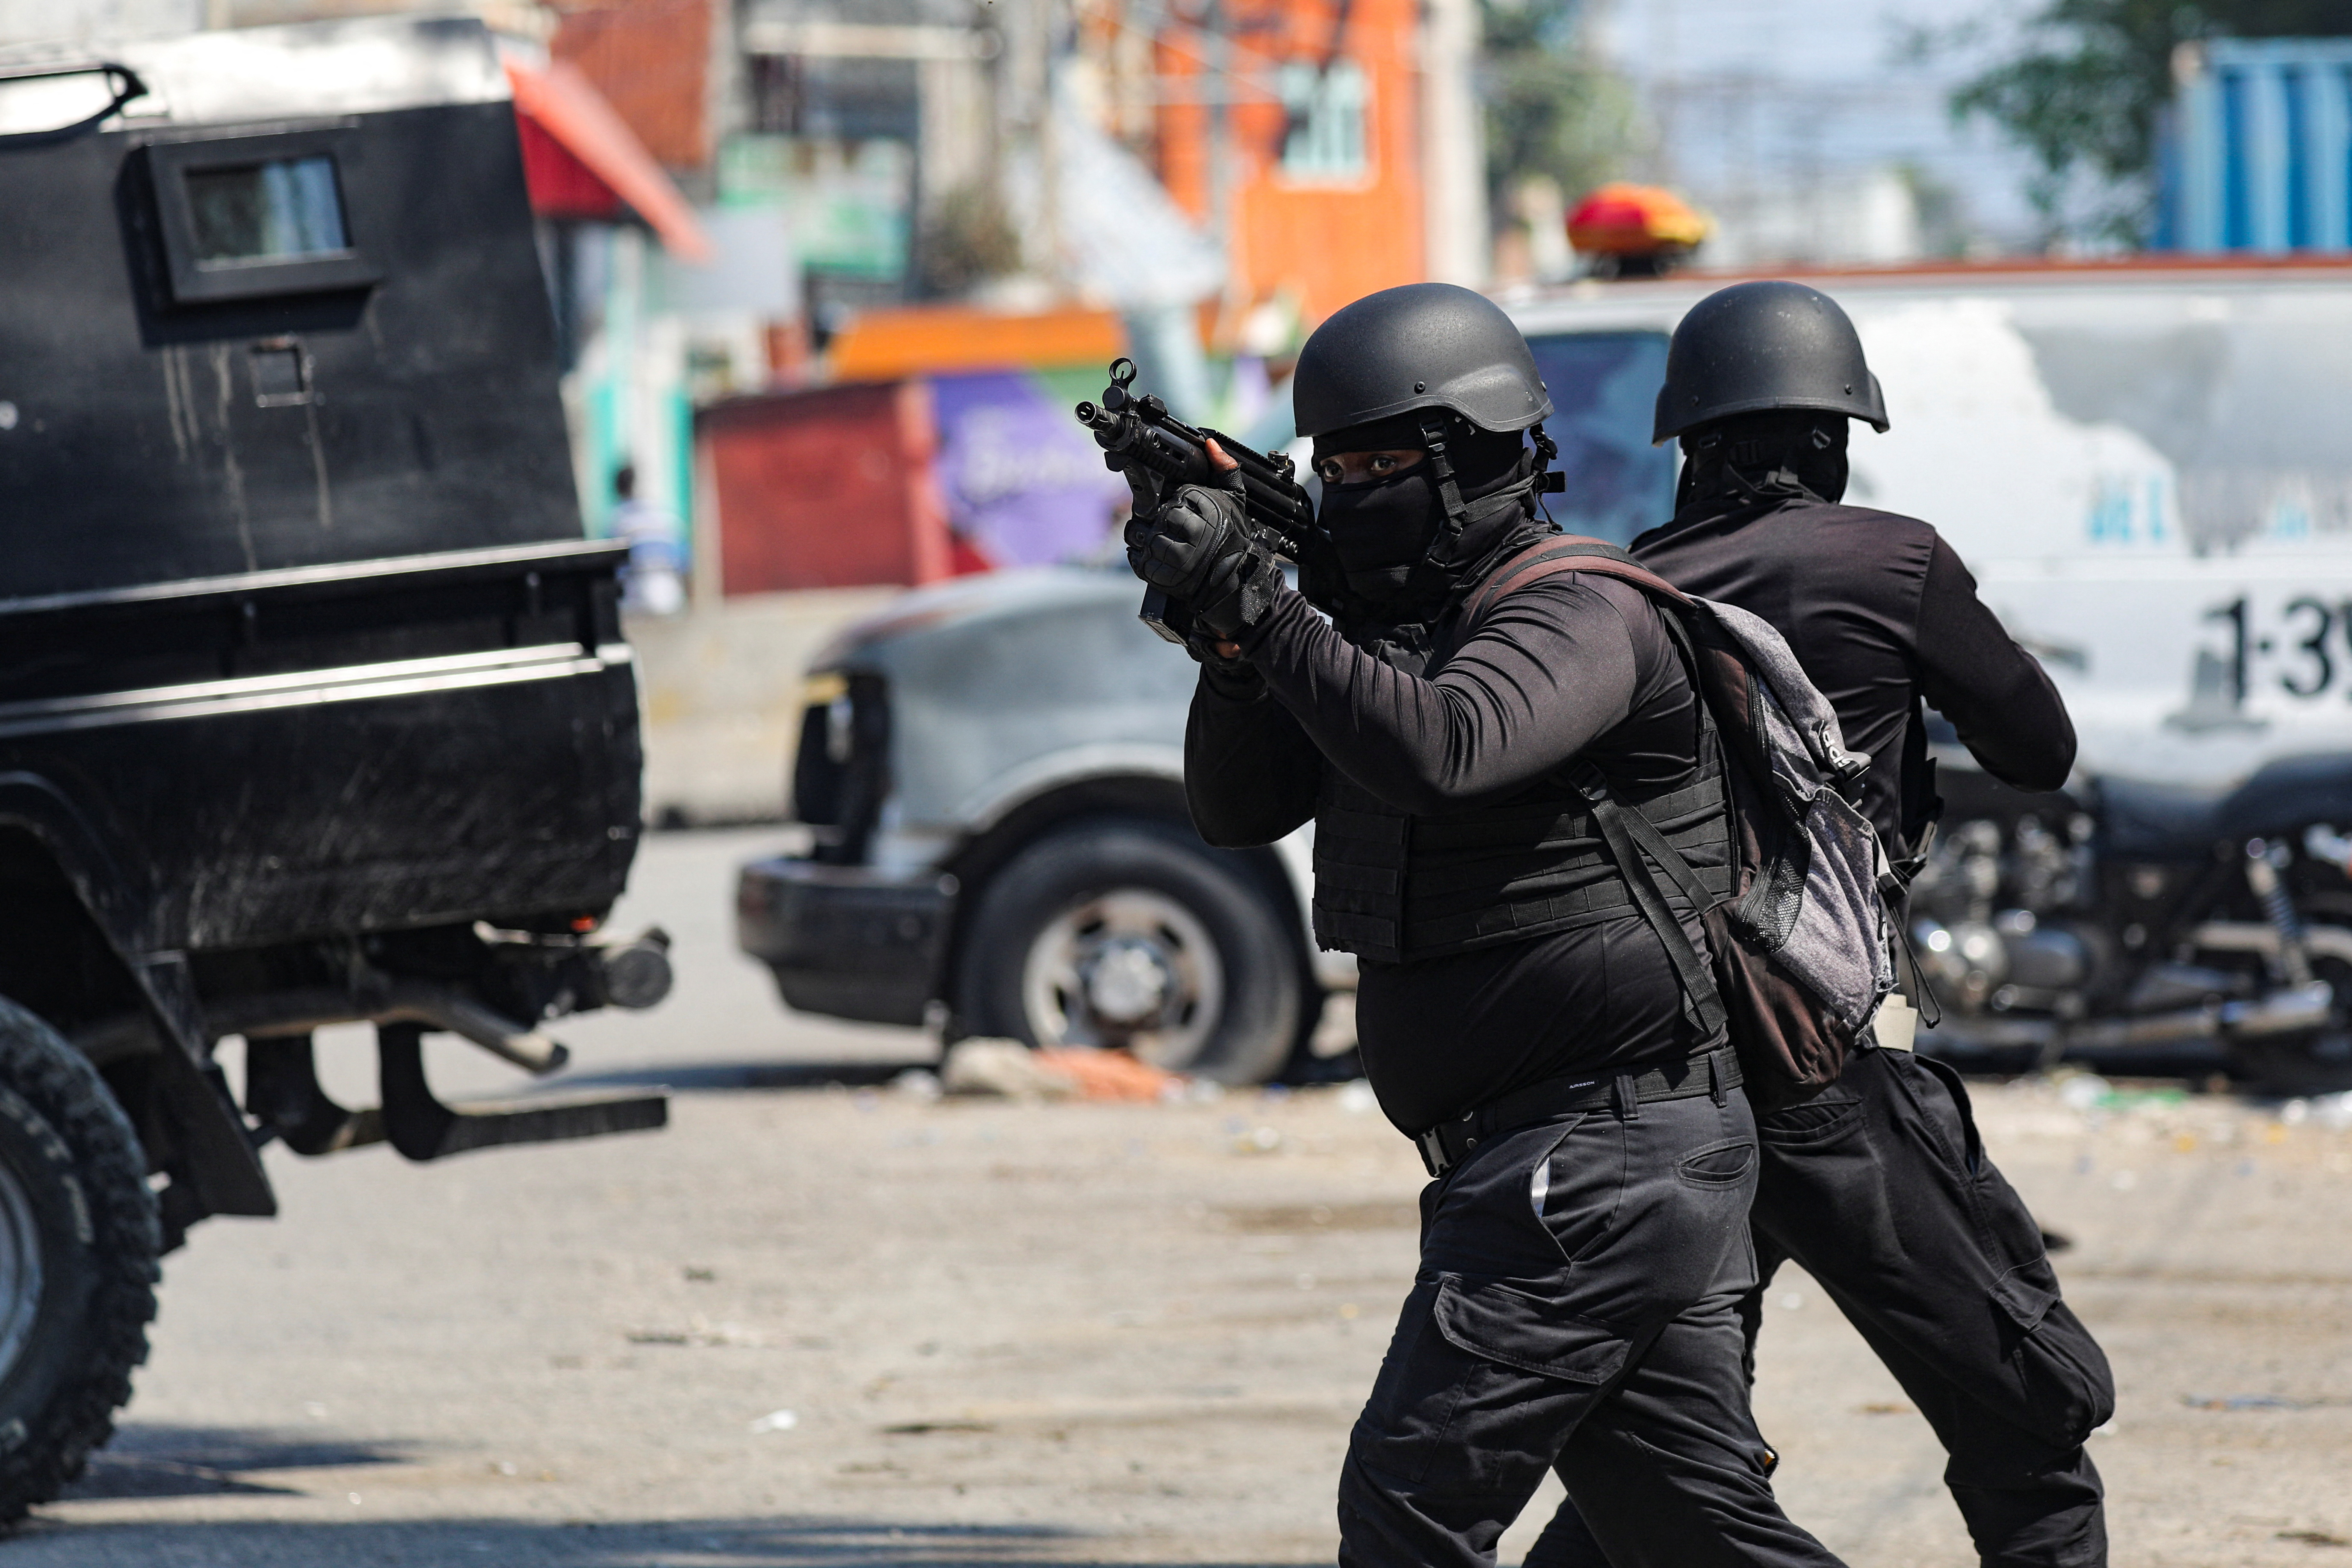 Haiti’s police force is outmanned and outgunned against the powerful armed gangs